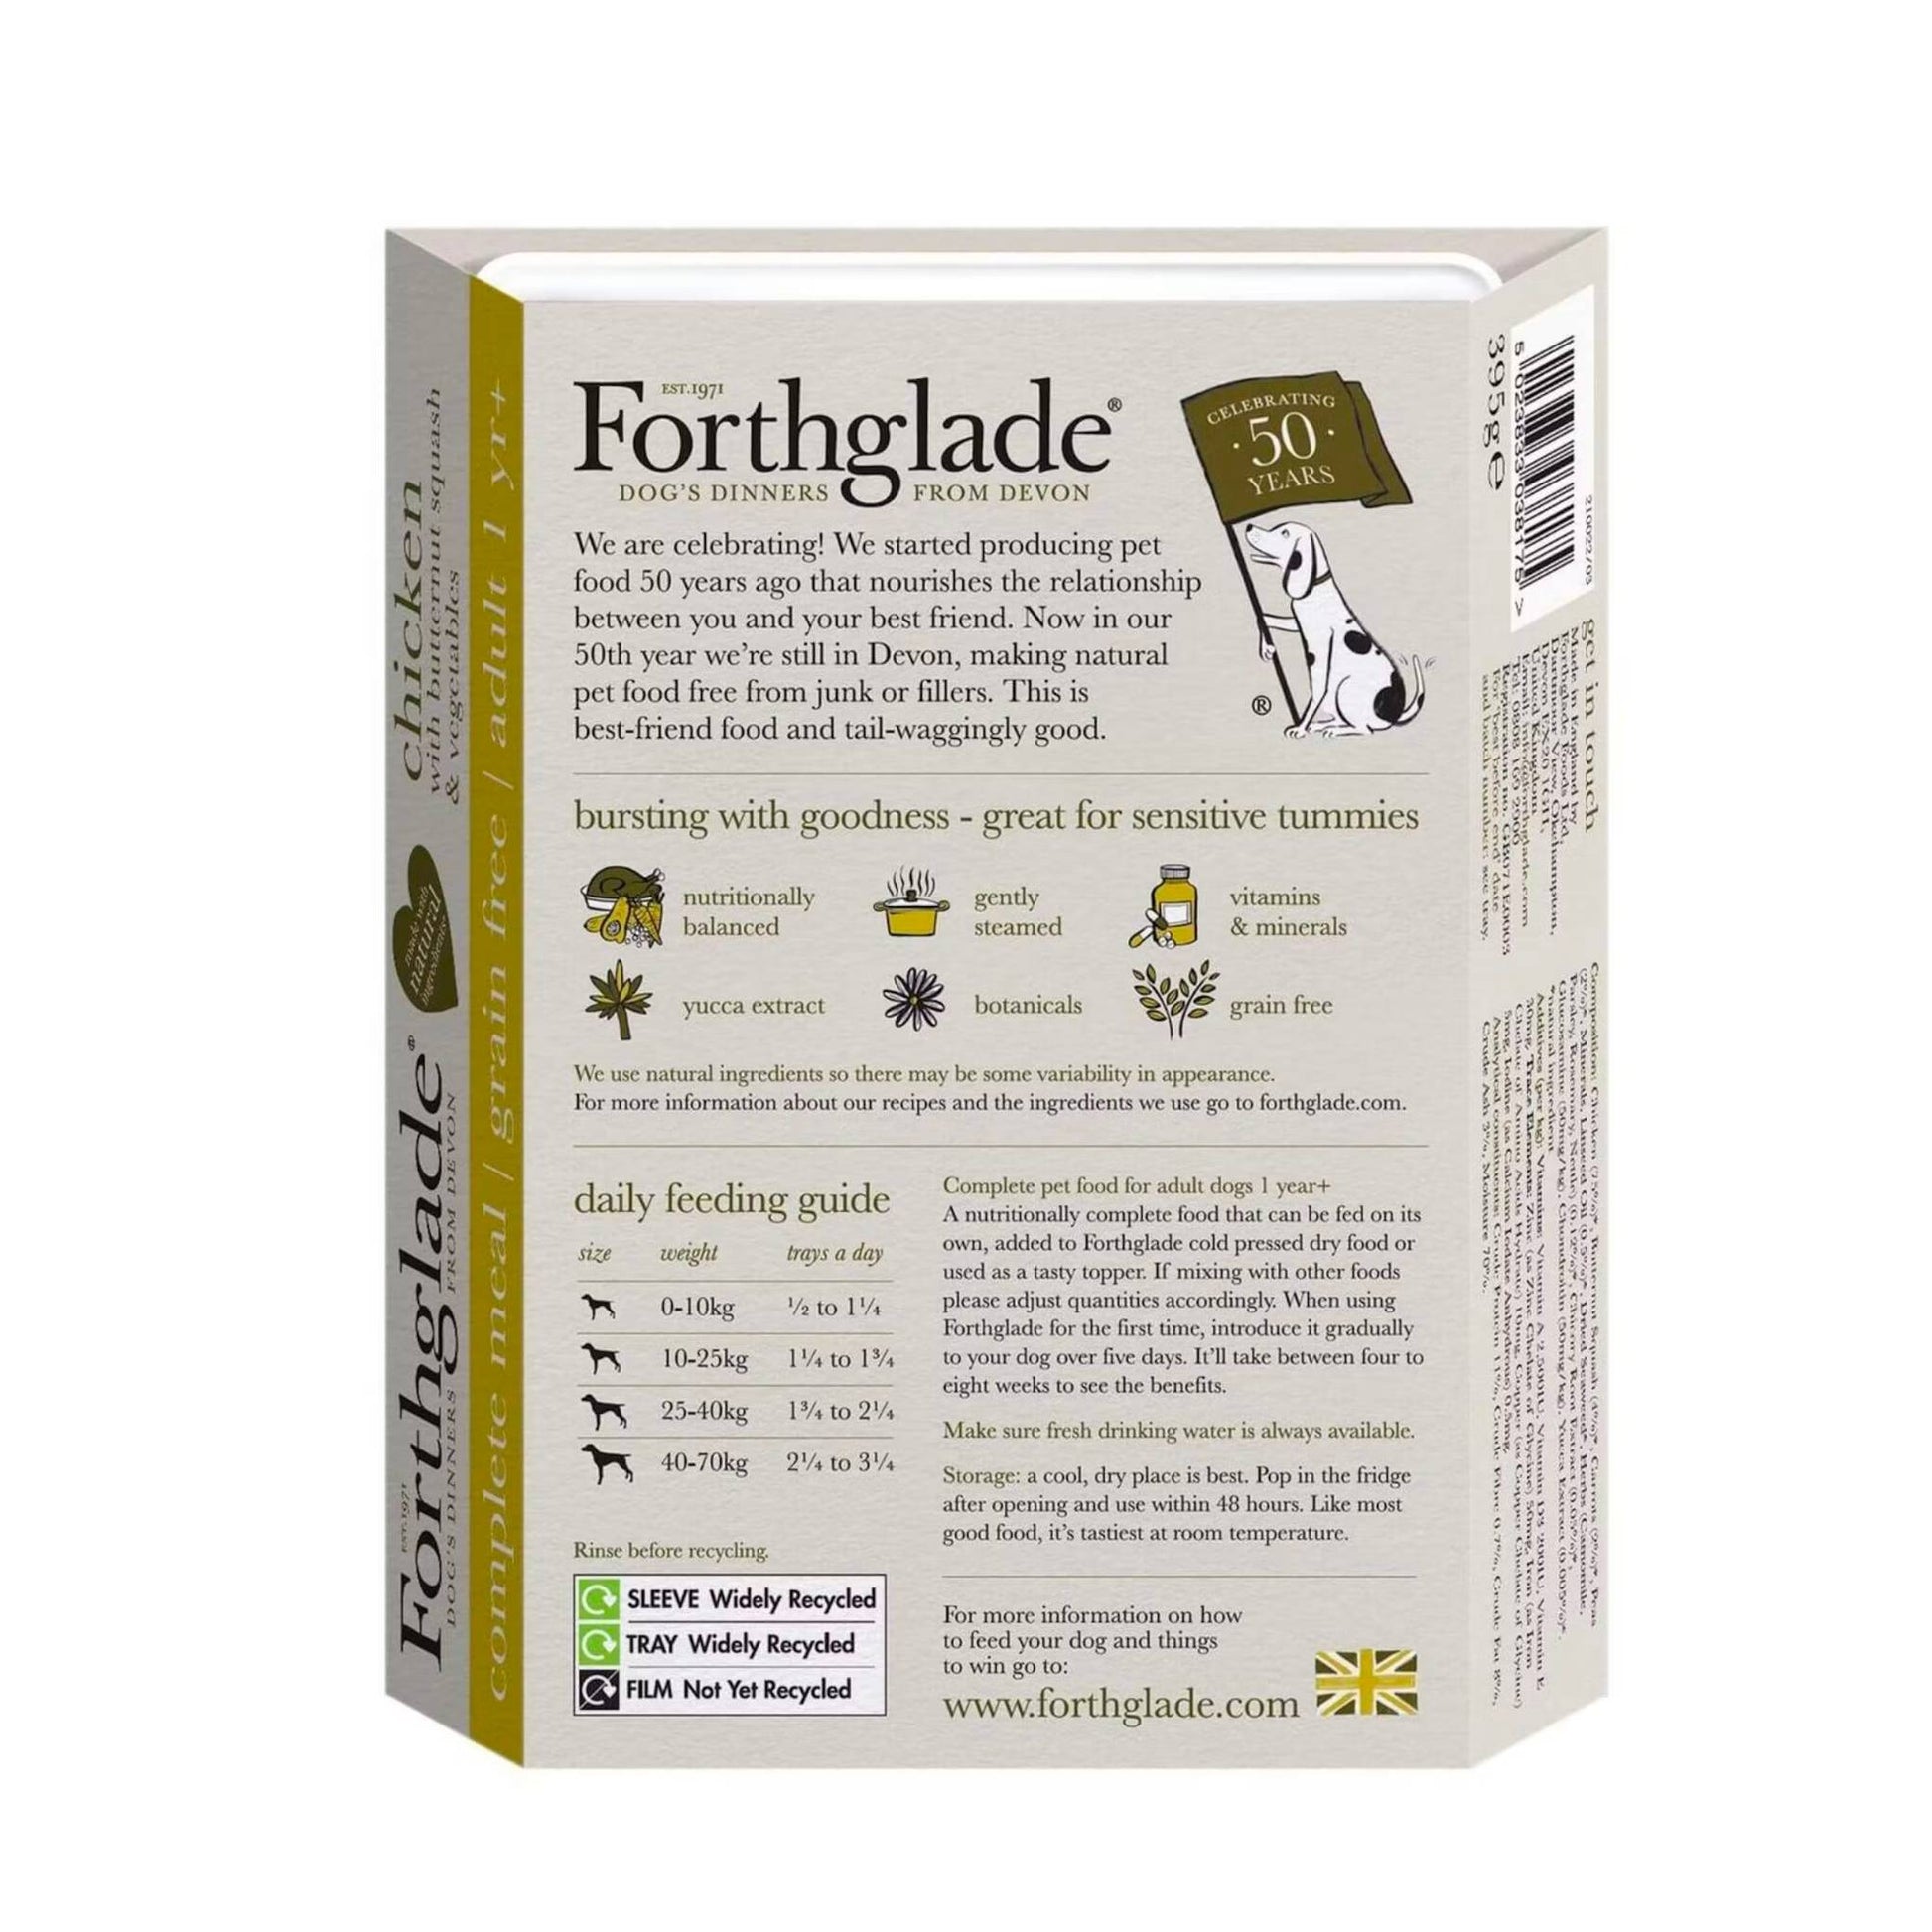 Forthglade Chicken Adult Complete Food ingredients and feeding guide. 